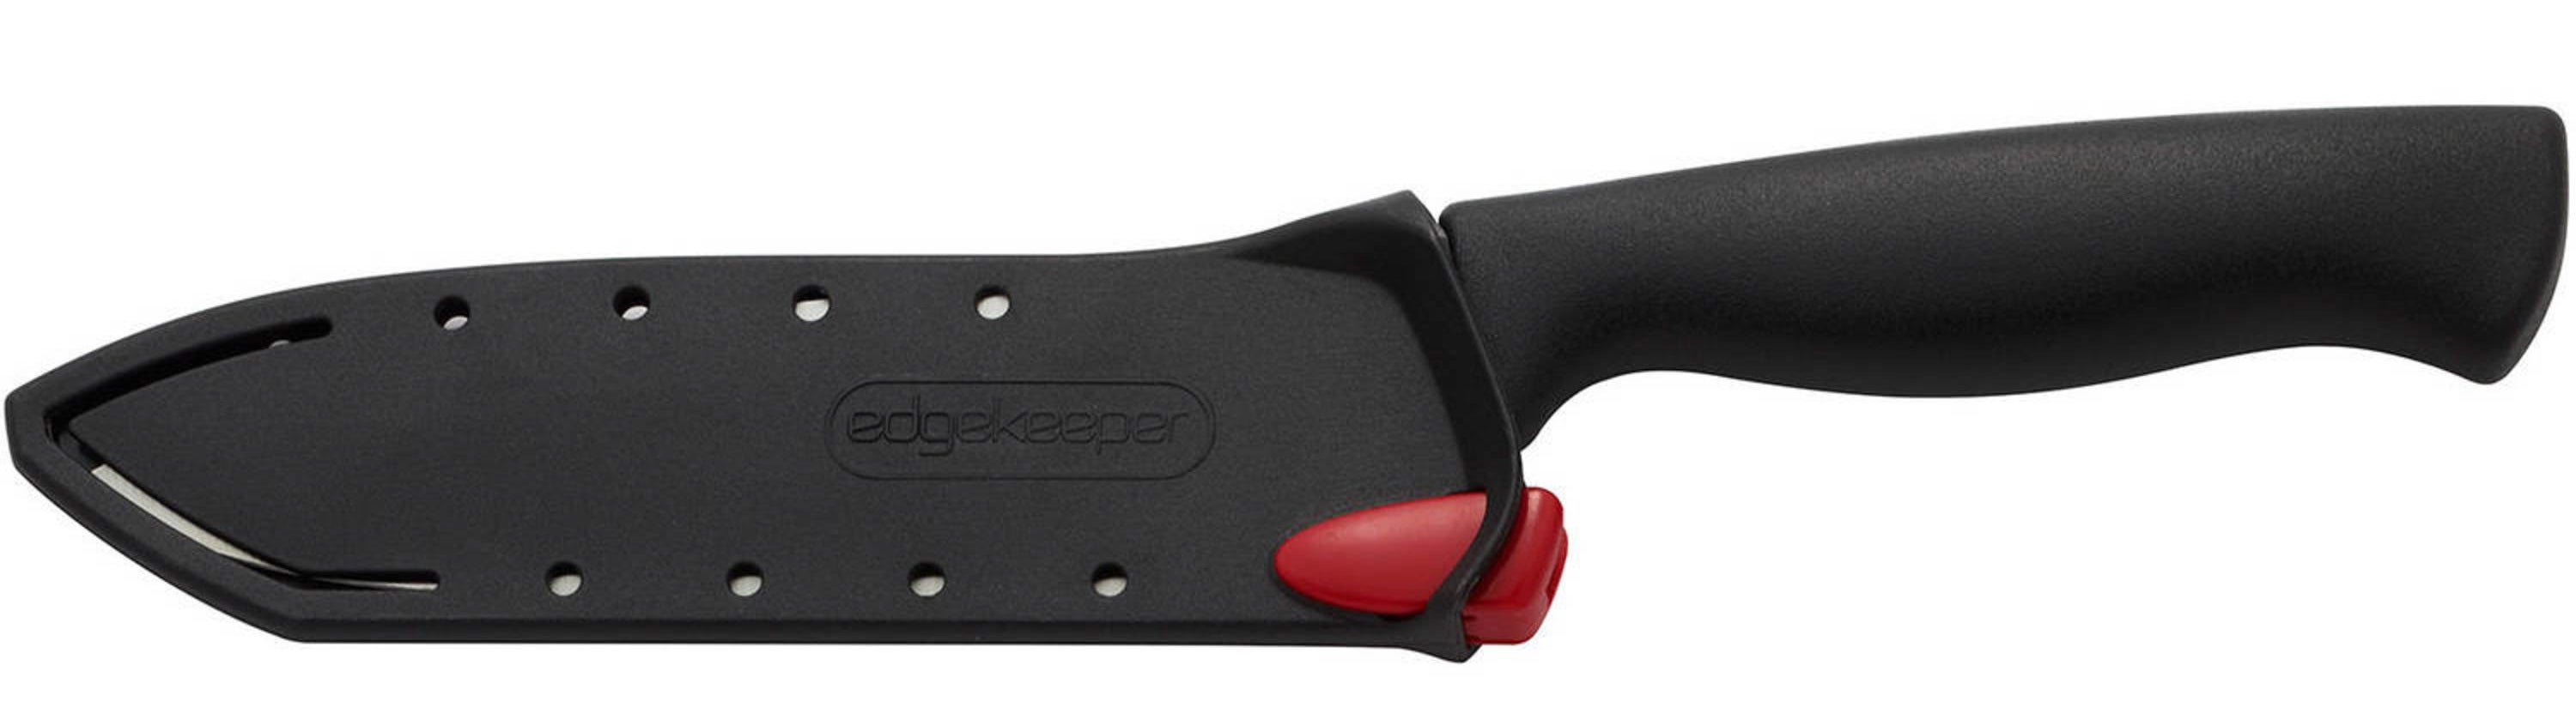 A 6-inch chef knife with a self-sharpening sleeve